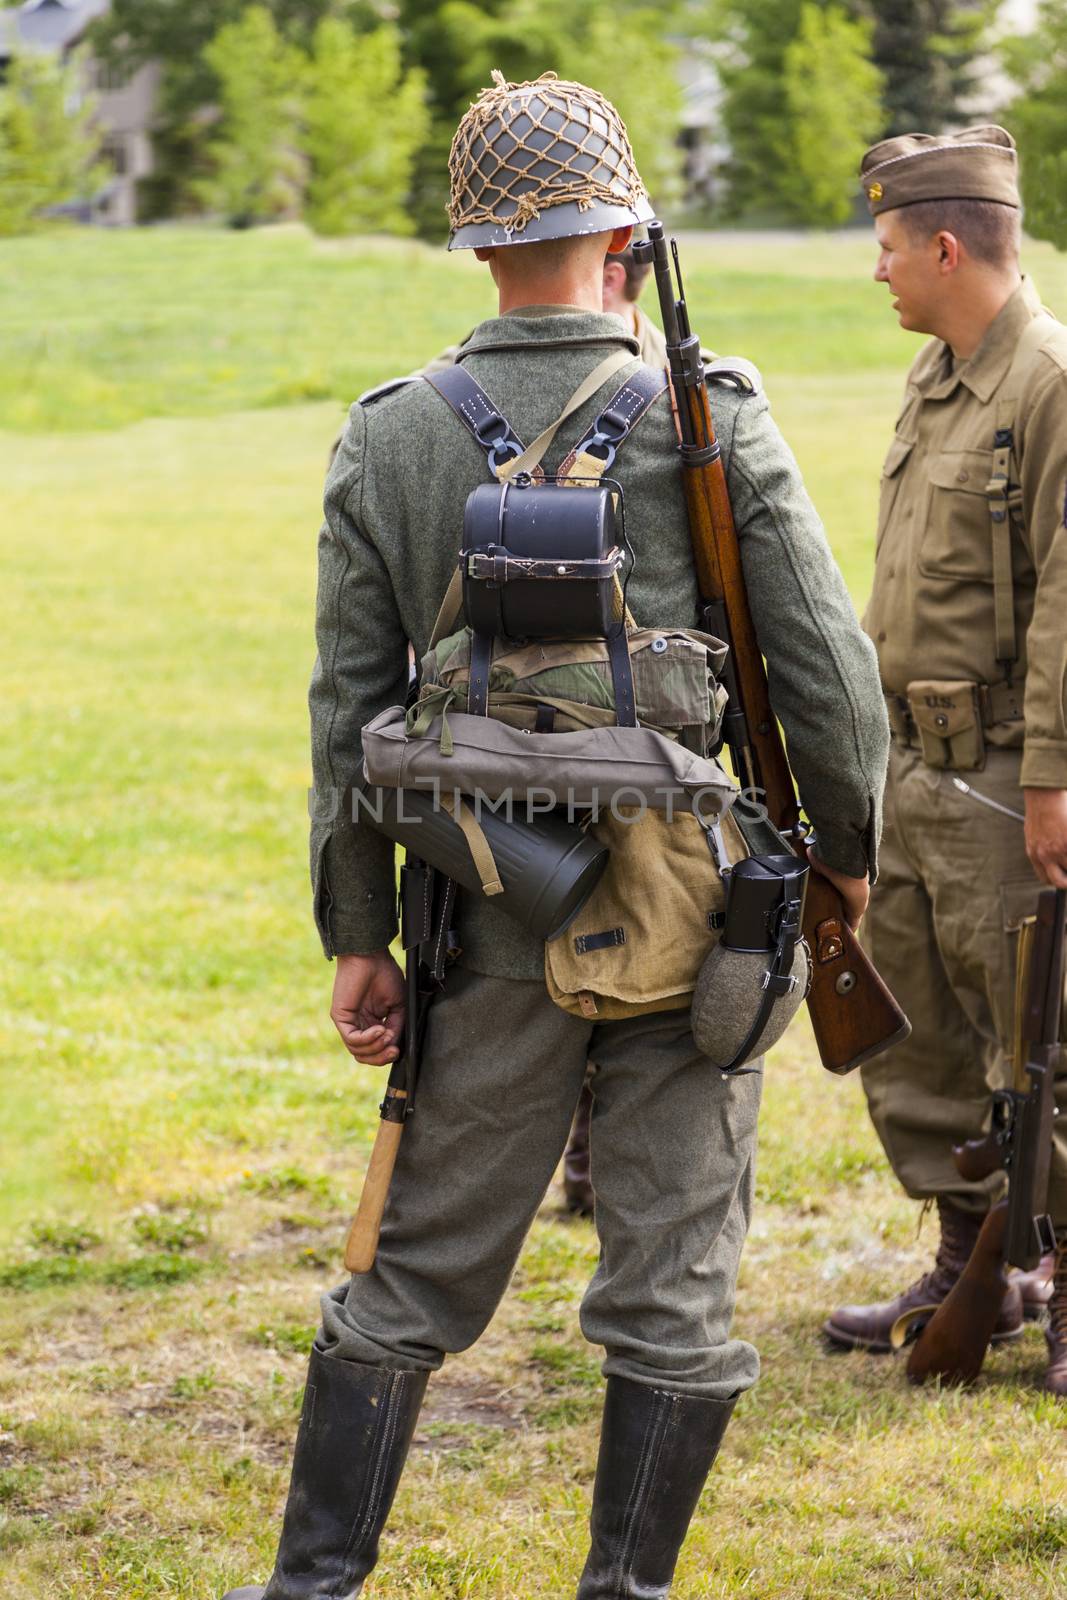 CALGARY CANADA JUN 13 2015: The Military Museum organized "Summer Skirmish" event where an unidentified soldier is seen in a historical Reenactment Battle.